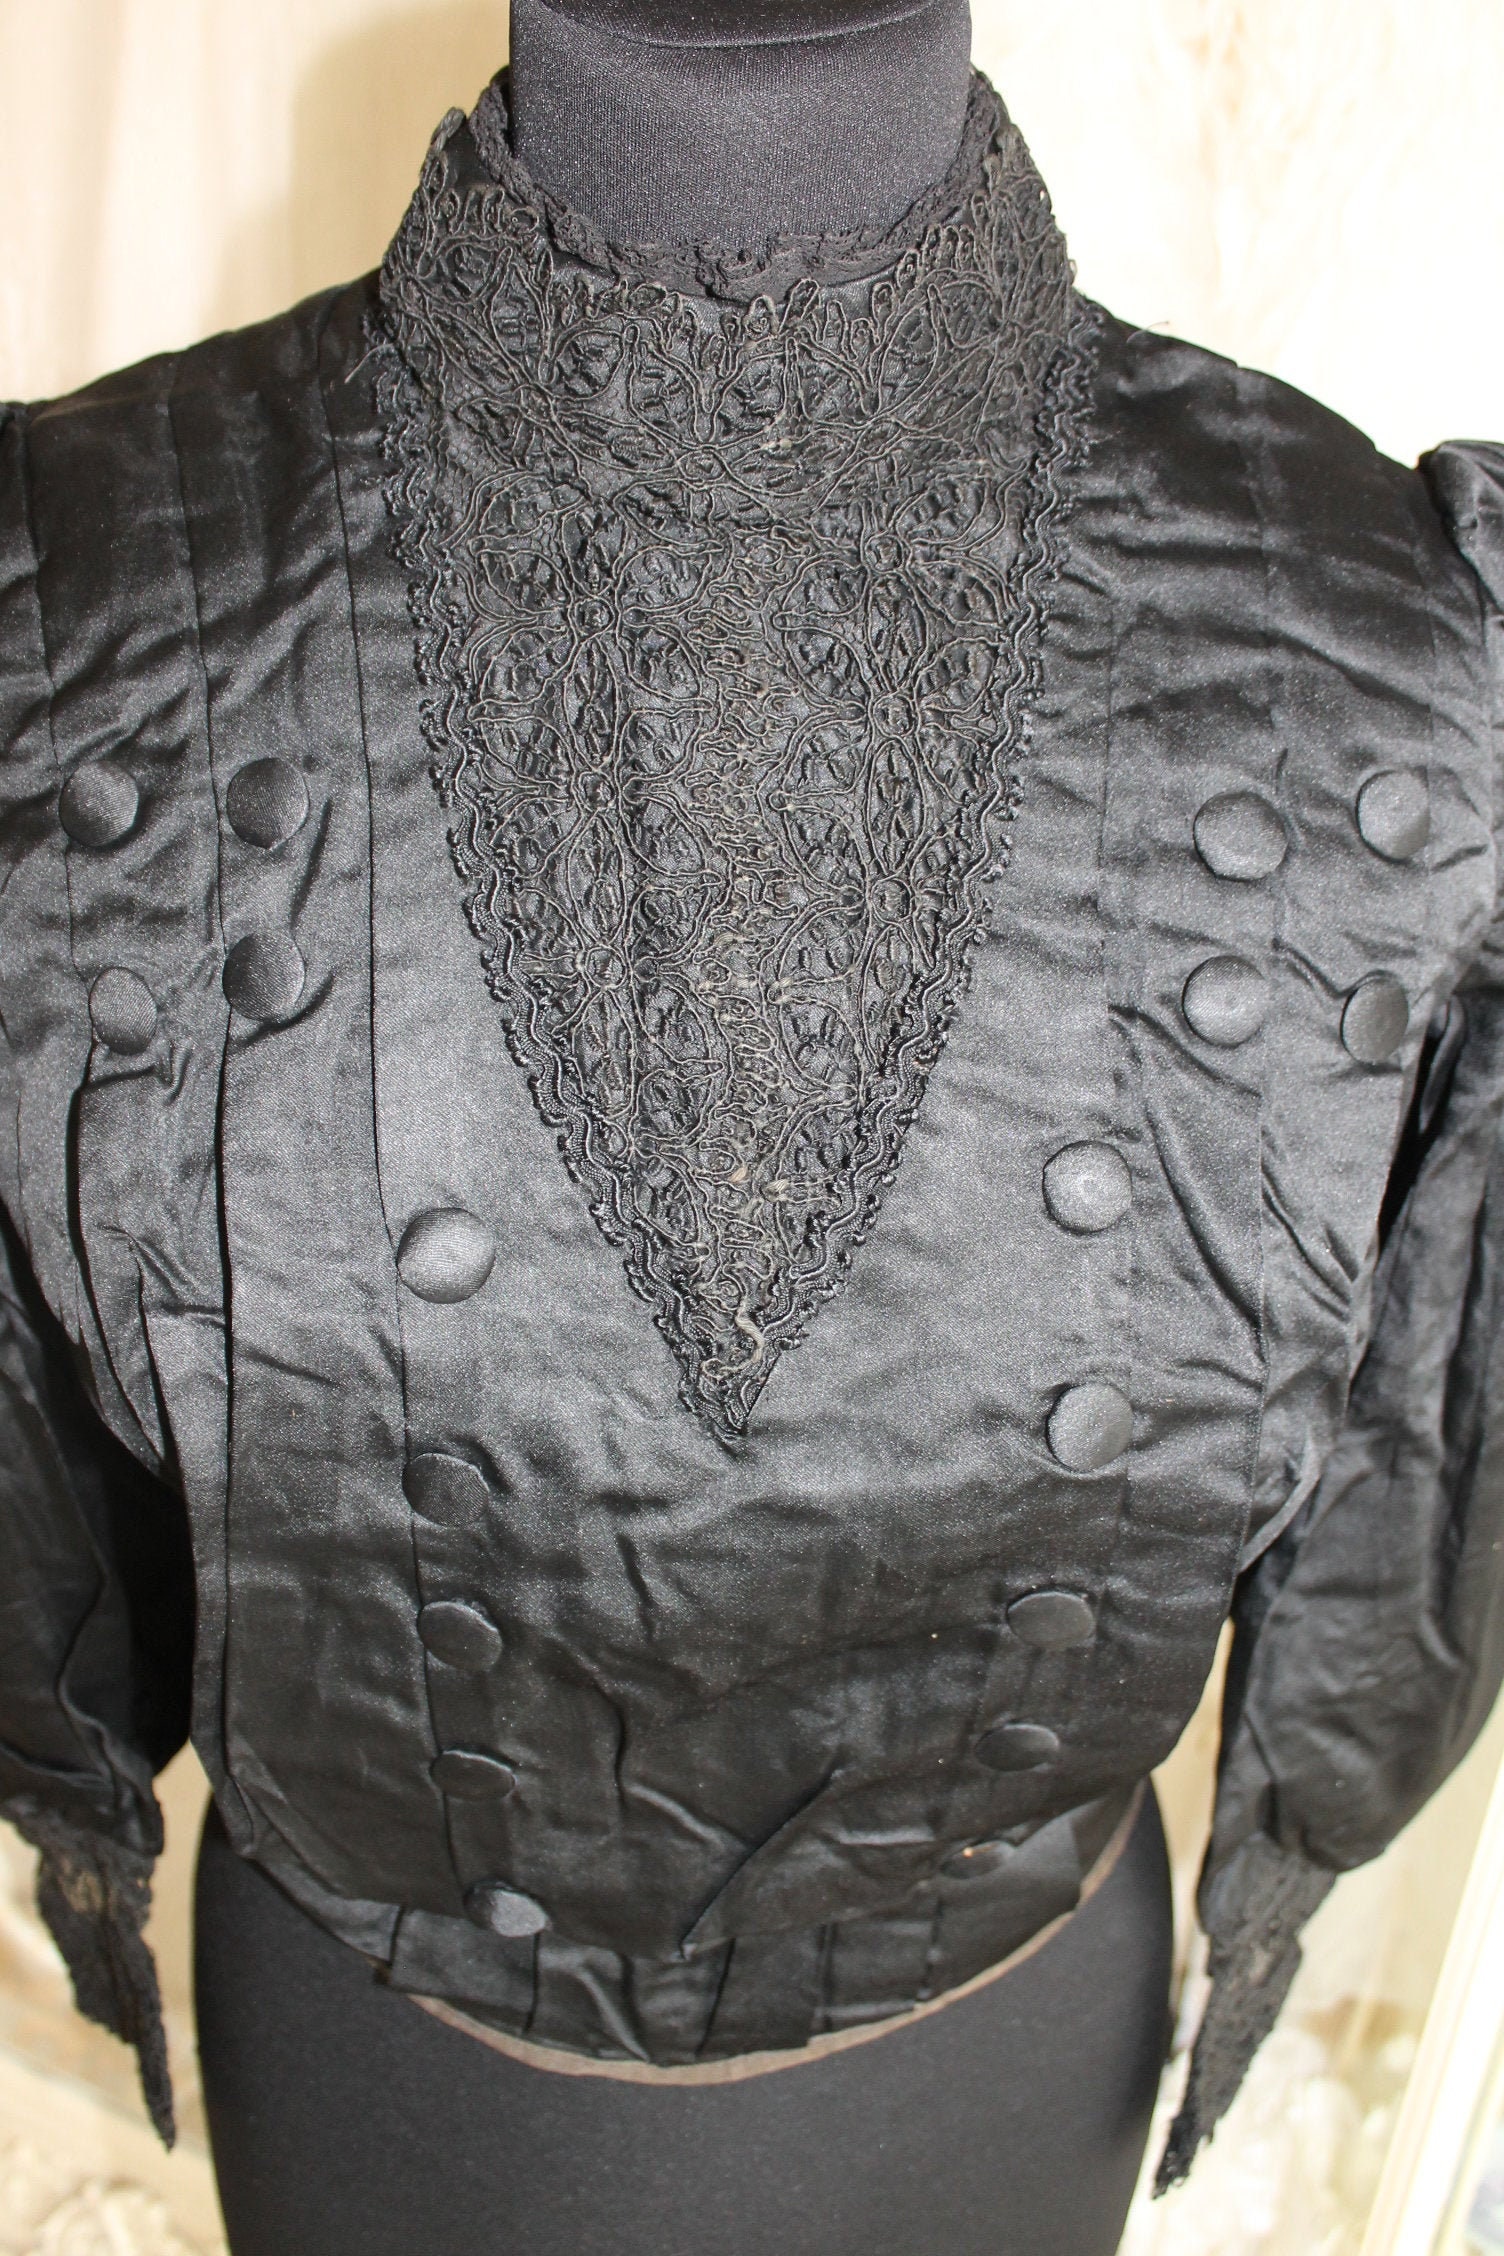 Edwardian fitted black satin blouse with lace and buttons | Etsy